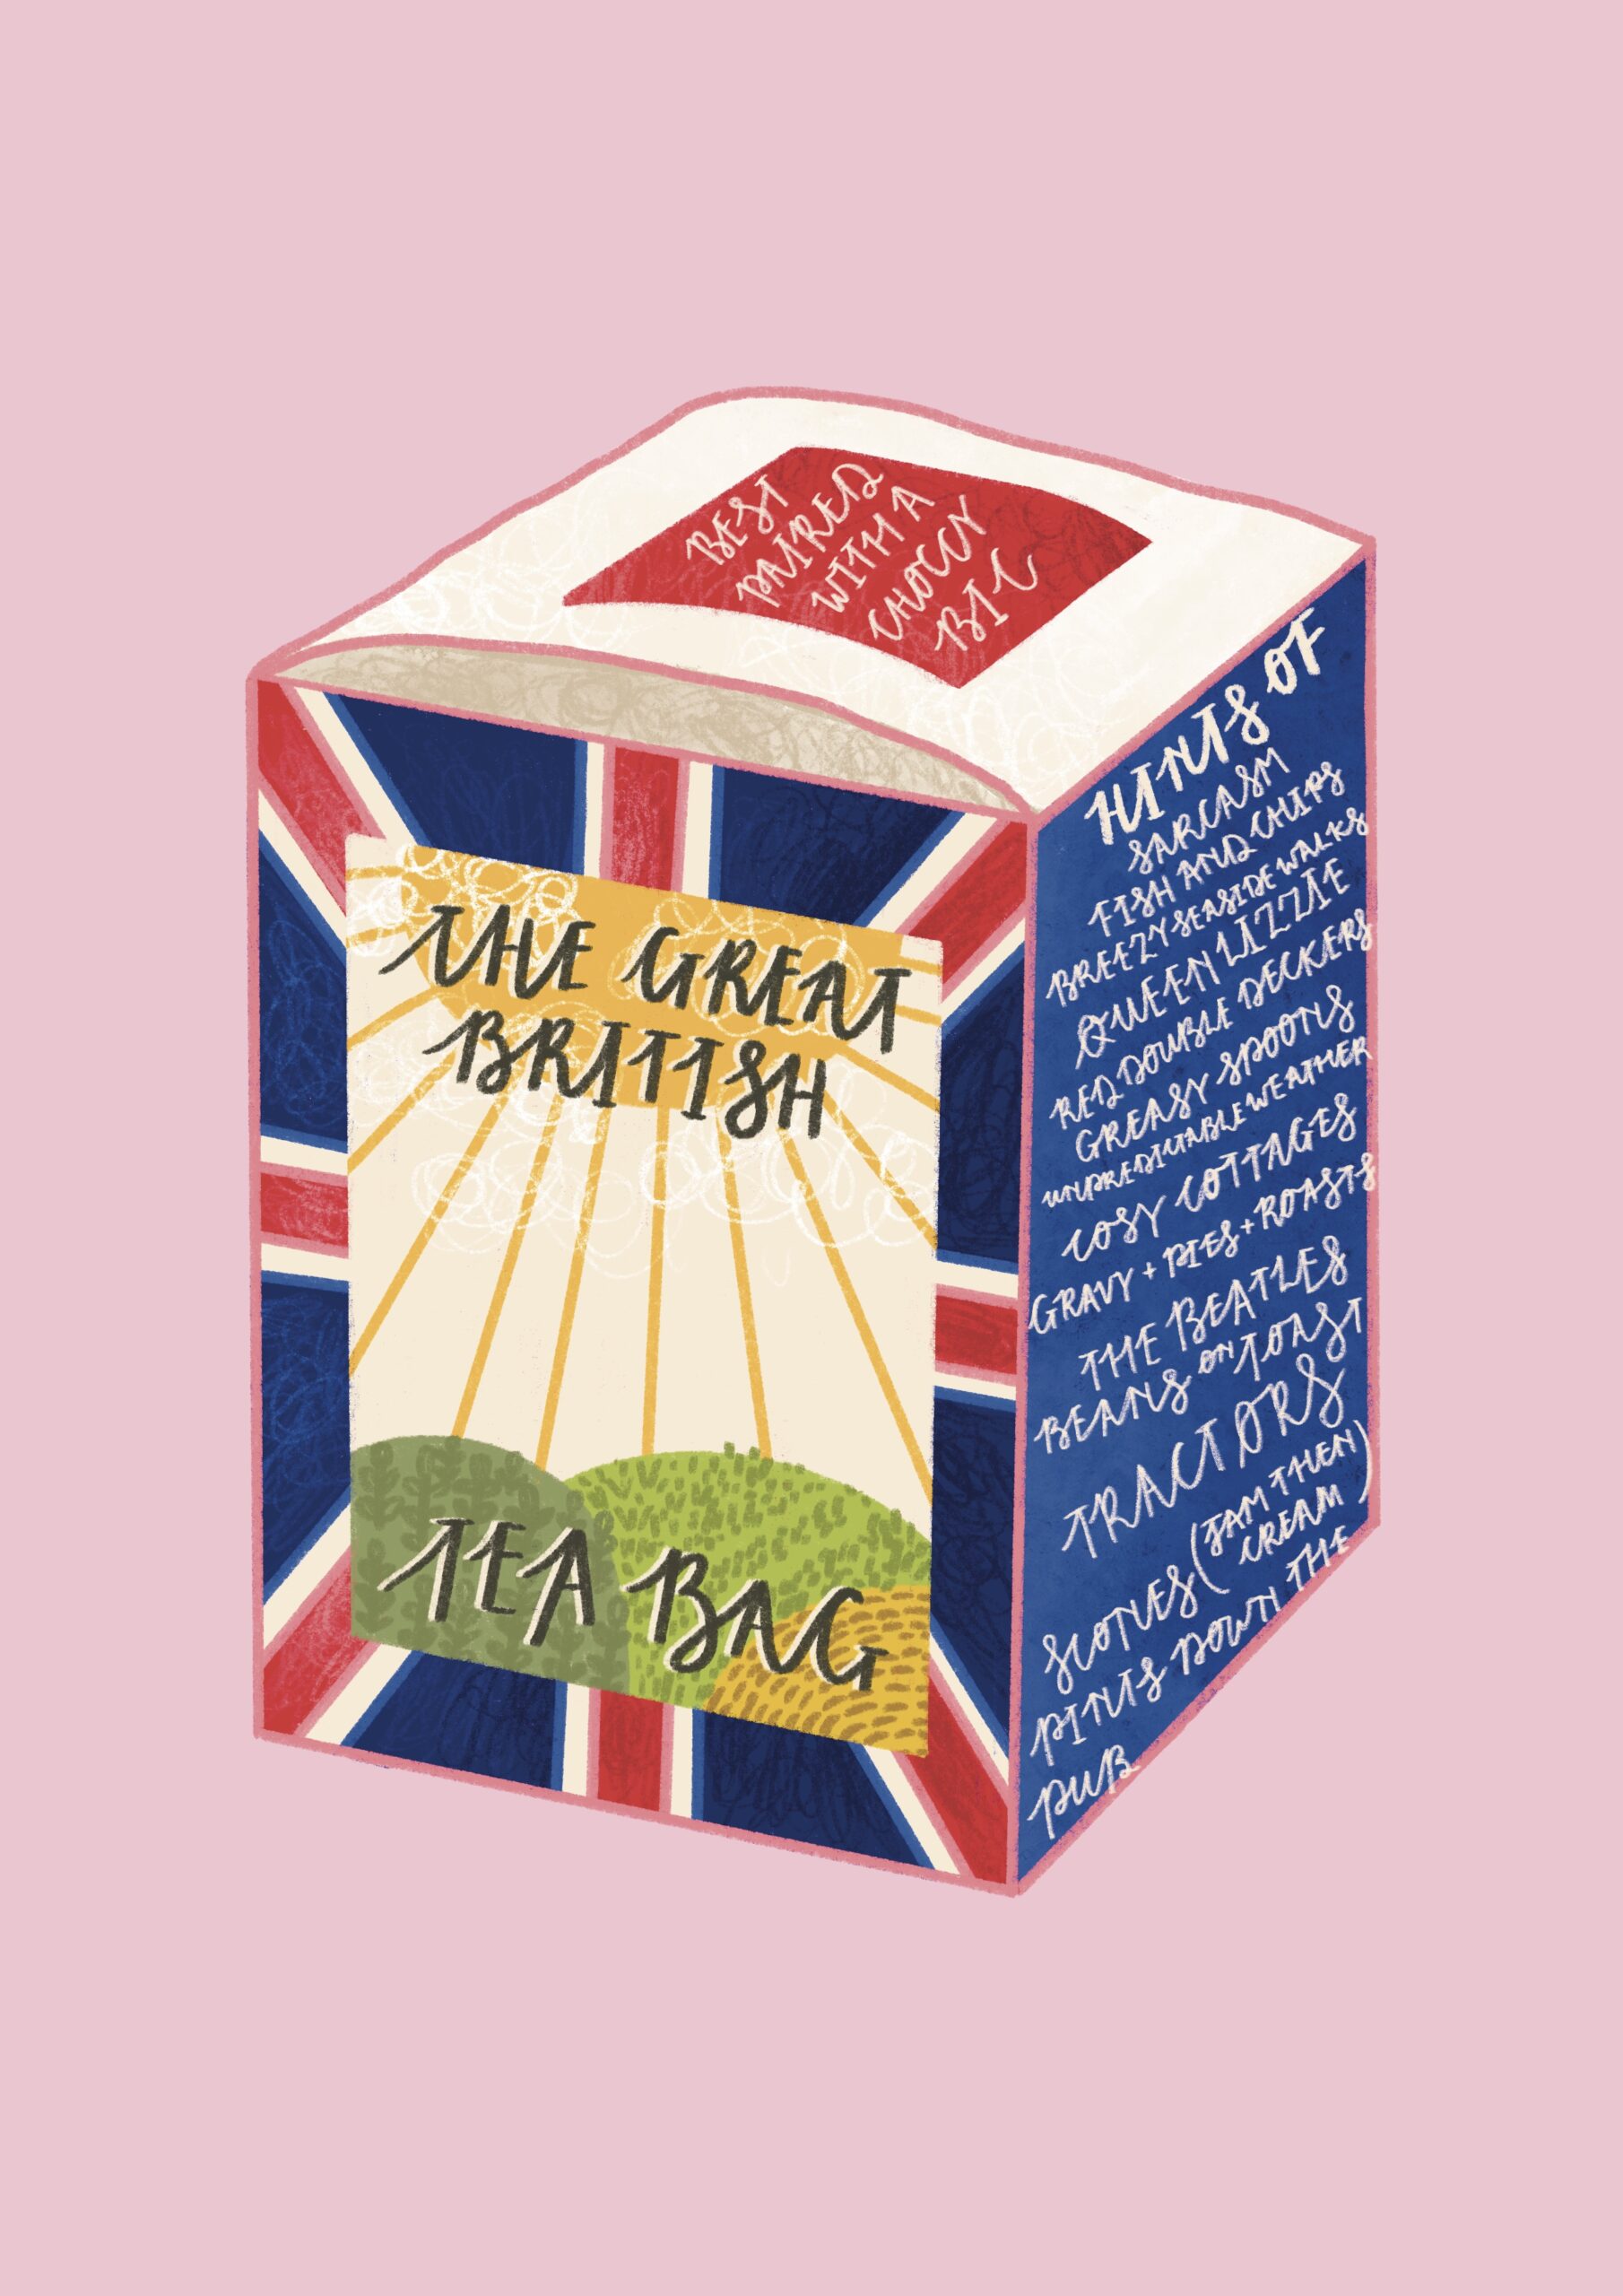 A box of teabags illustration - the box has a union jack pattern on it, with scenes of rolling hills and a sunshine. The ingredients part of the box includes British attributes that the UK and people have who live here.